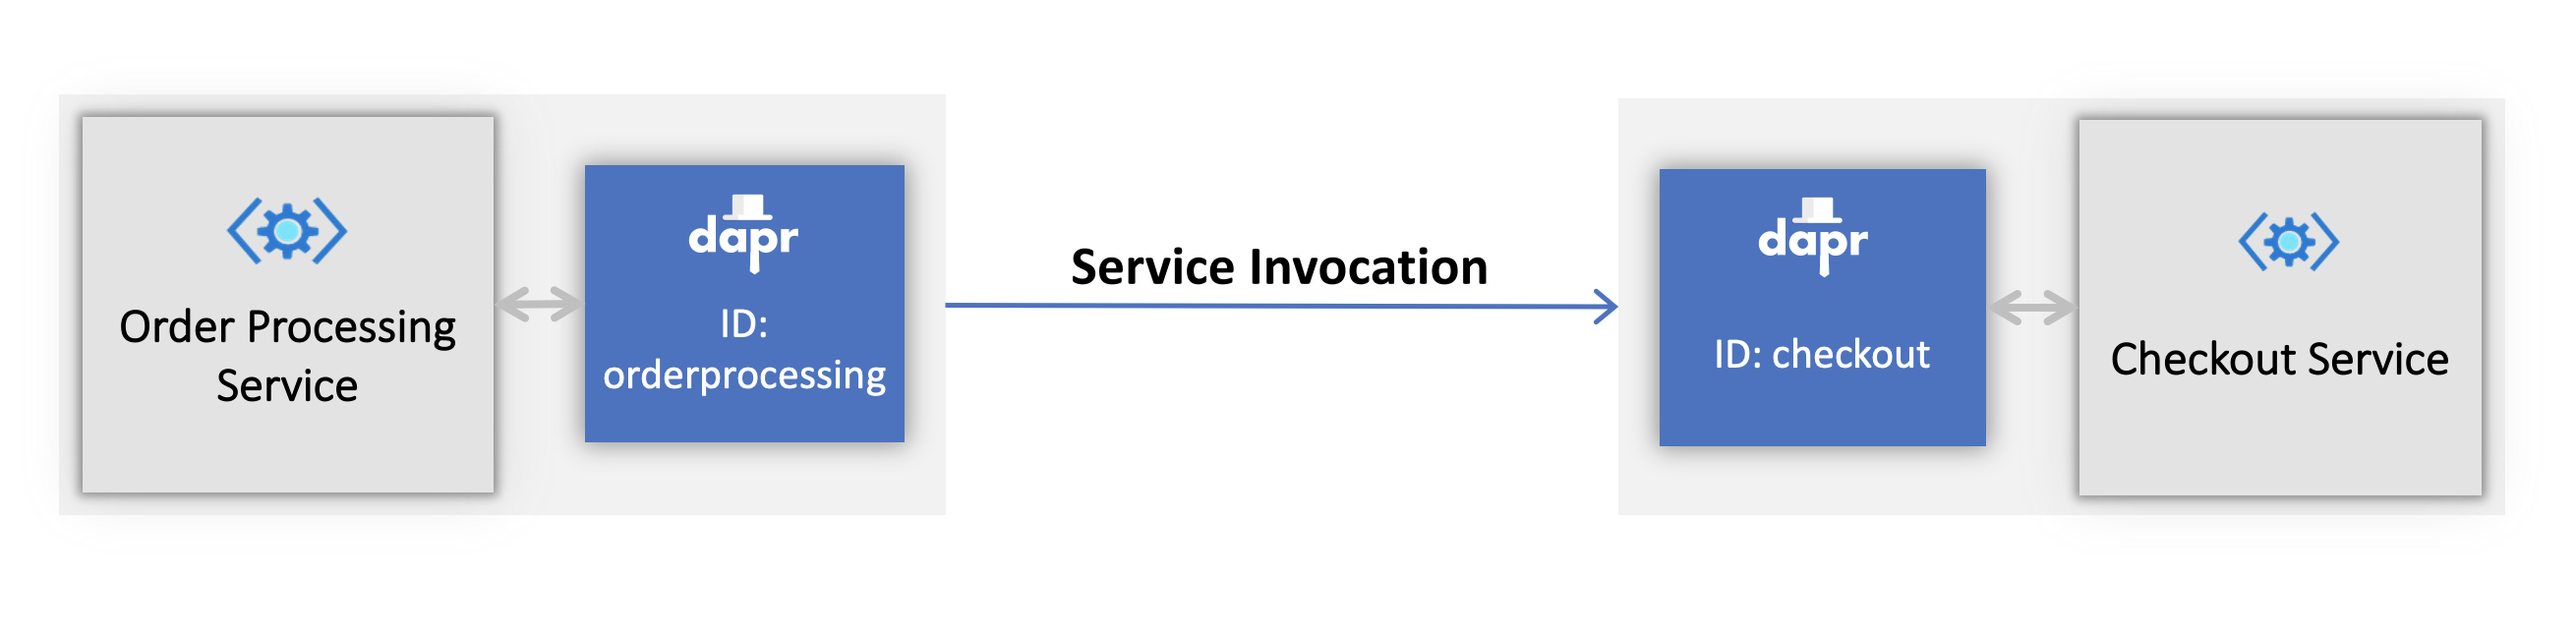 Diagram showing service invocation of example service